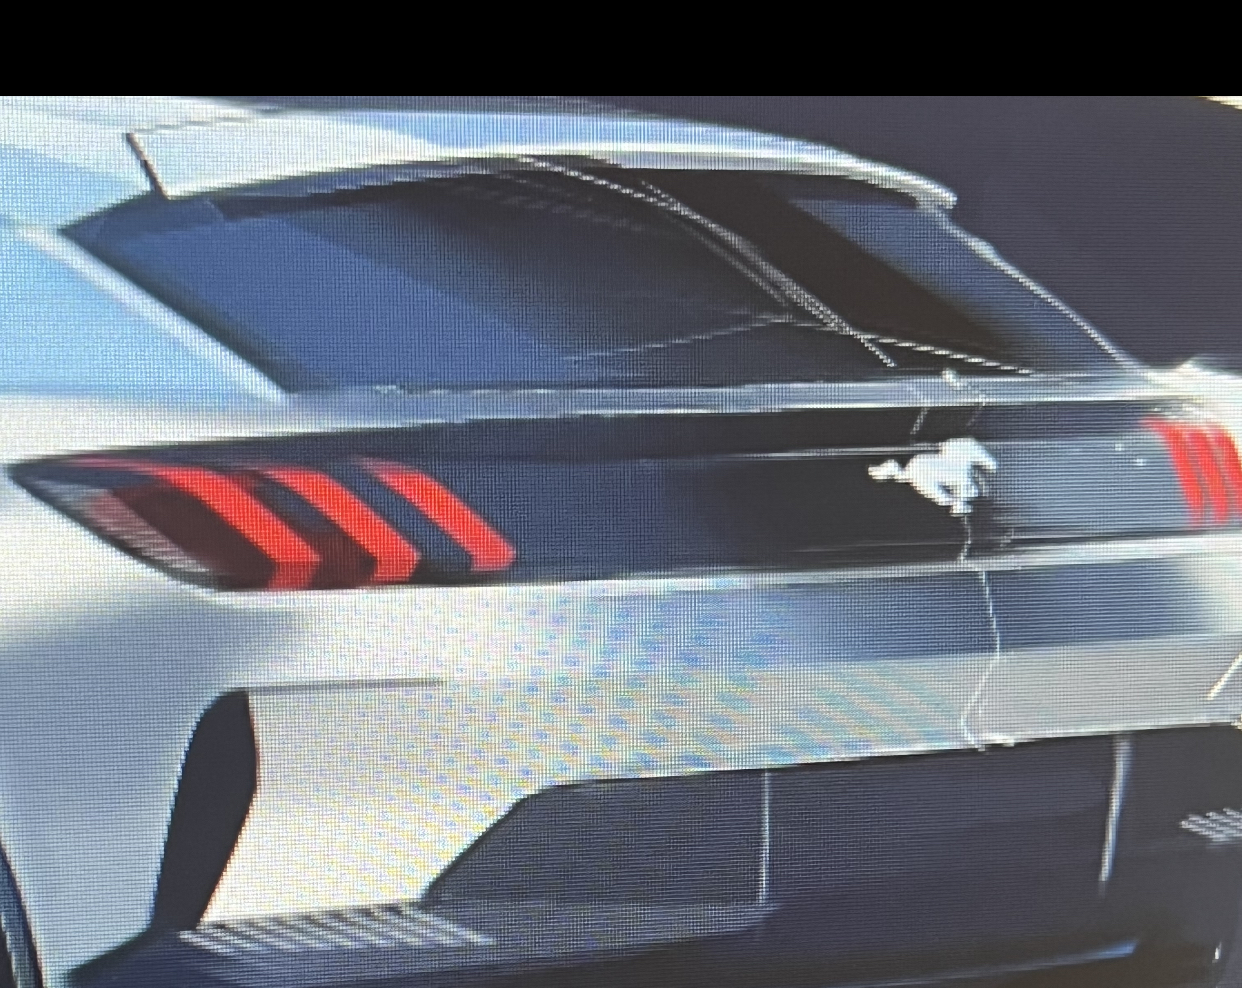 S650 Mustang chazcron weighs in... 7th gen 2023 Mustang S650 3D model & renderings in several colors! 9e1facbb-f750-46e4-829b-d6af03dd5303-jpe